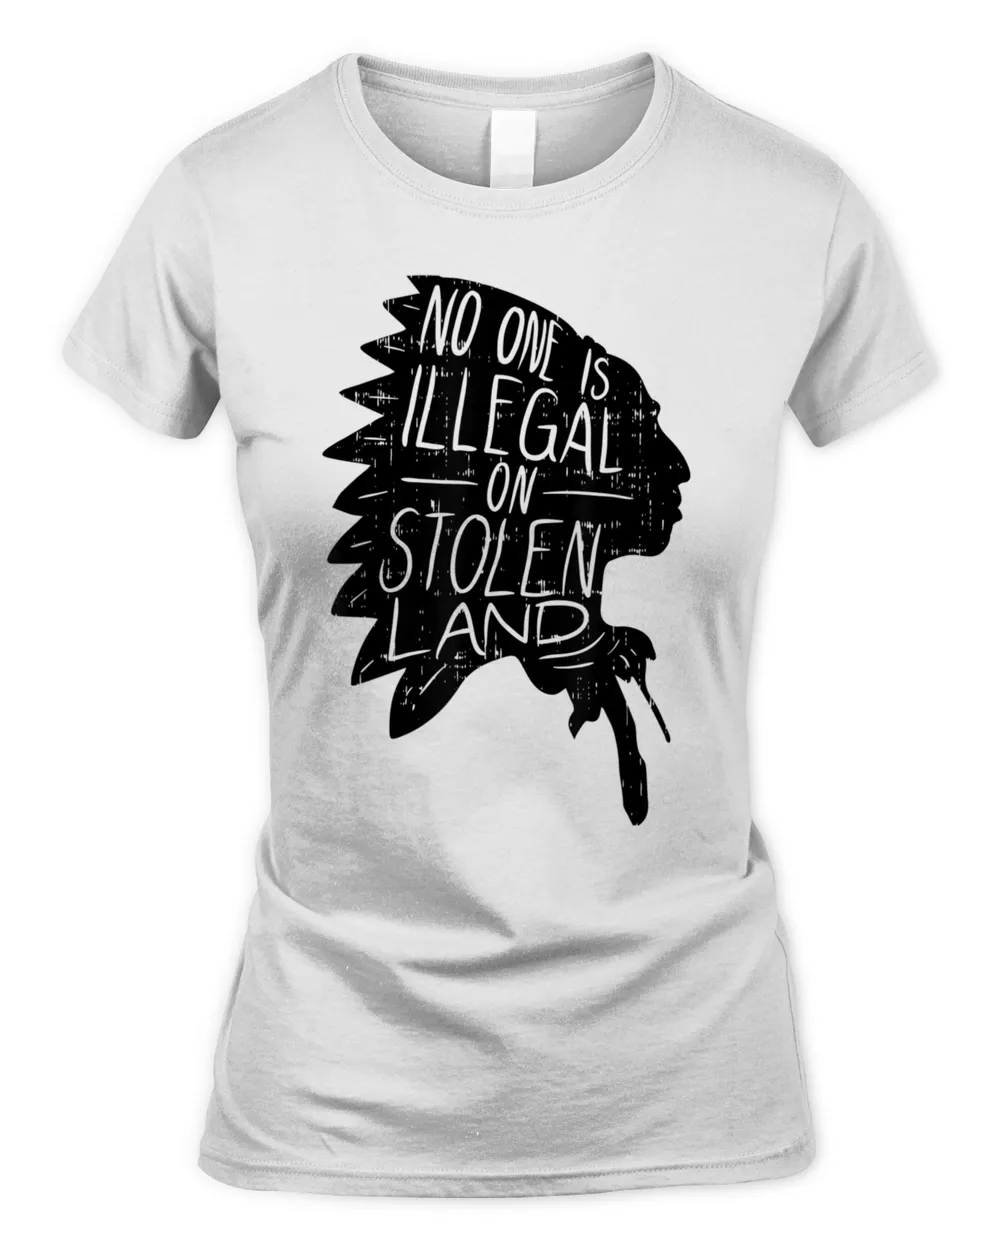 No One Is Illegal On Stolen Land